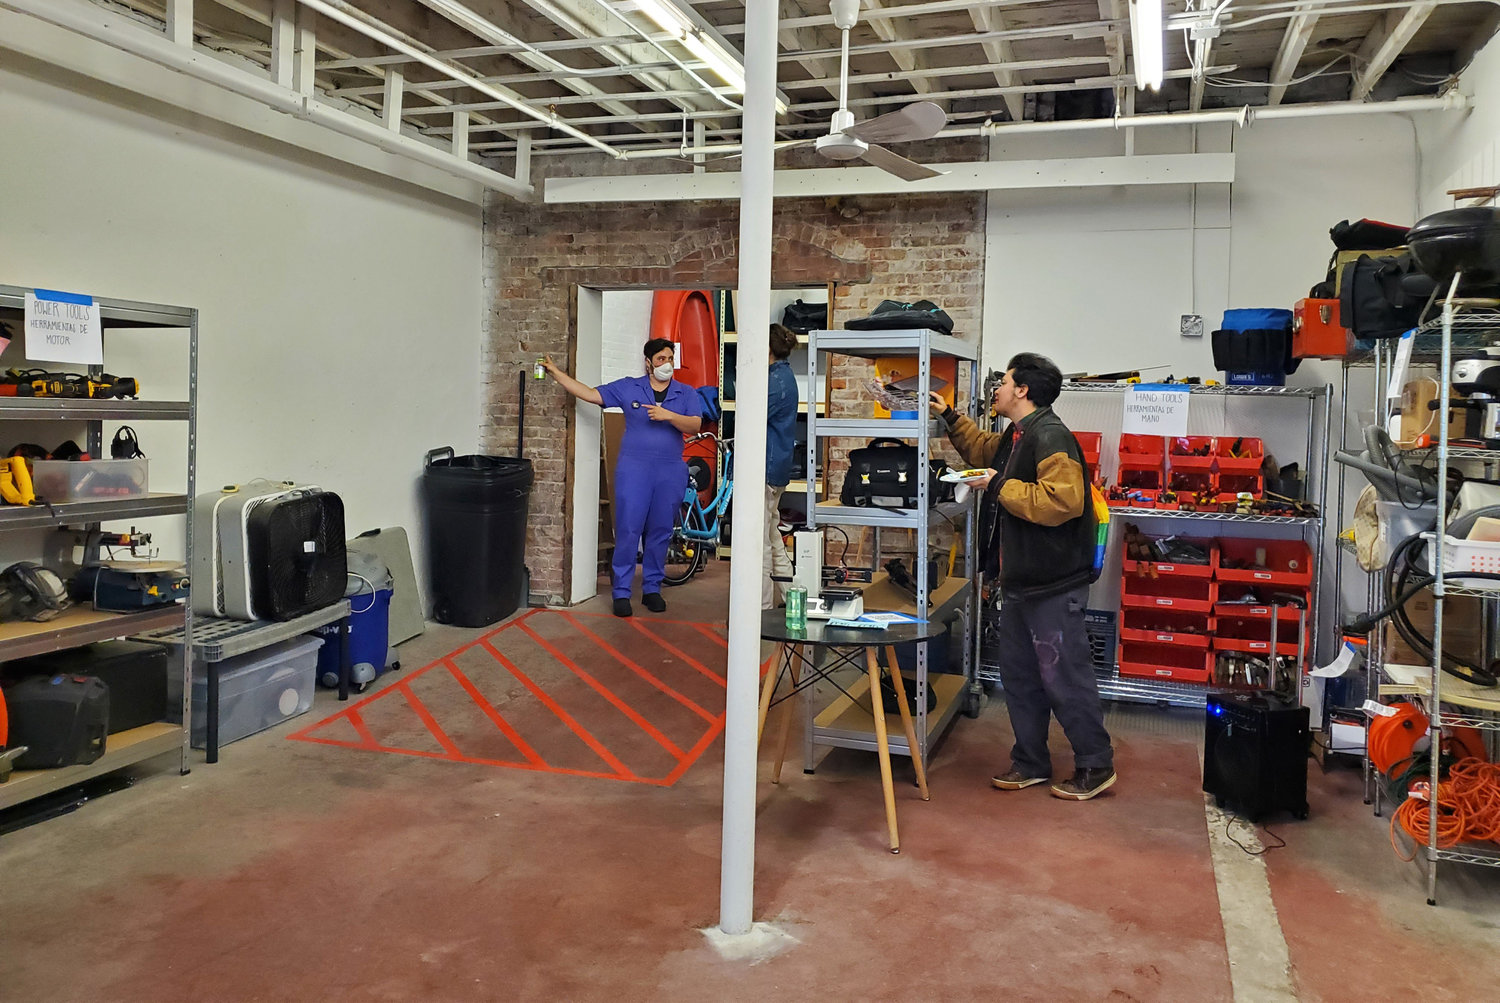 A unique Olneyville cooperative allows members to rent out tools and equipment